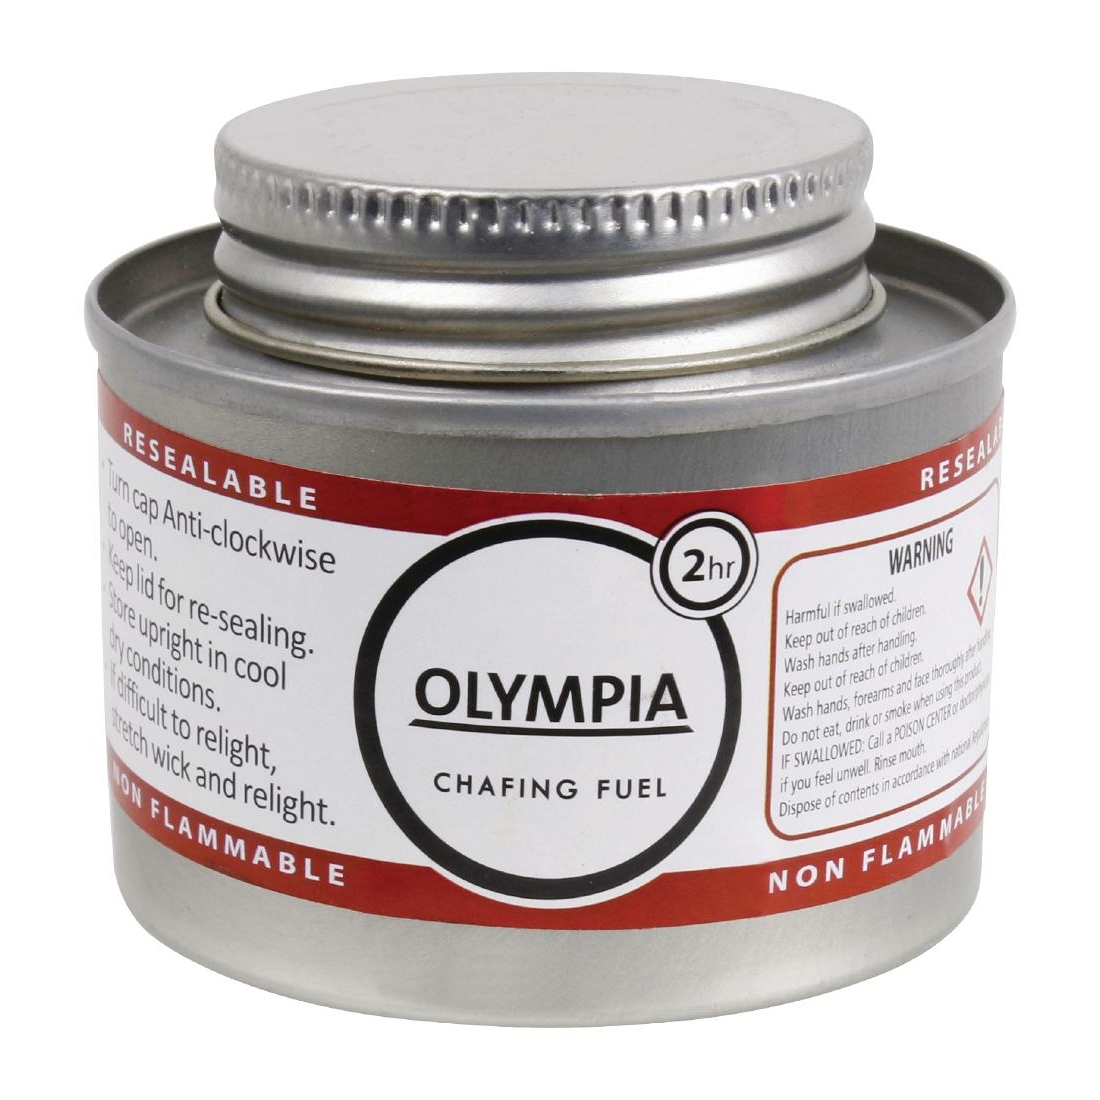 Olympia Liquid Chafing Fuel With Wick 2 Hour x 12